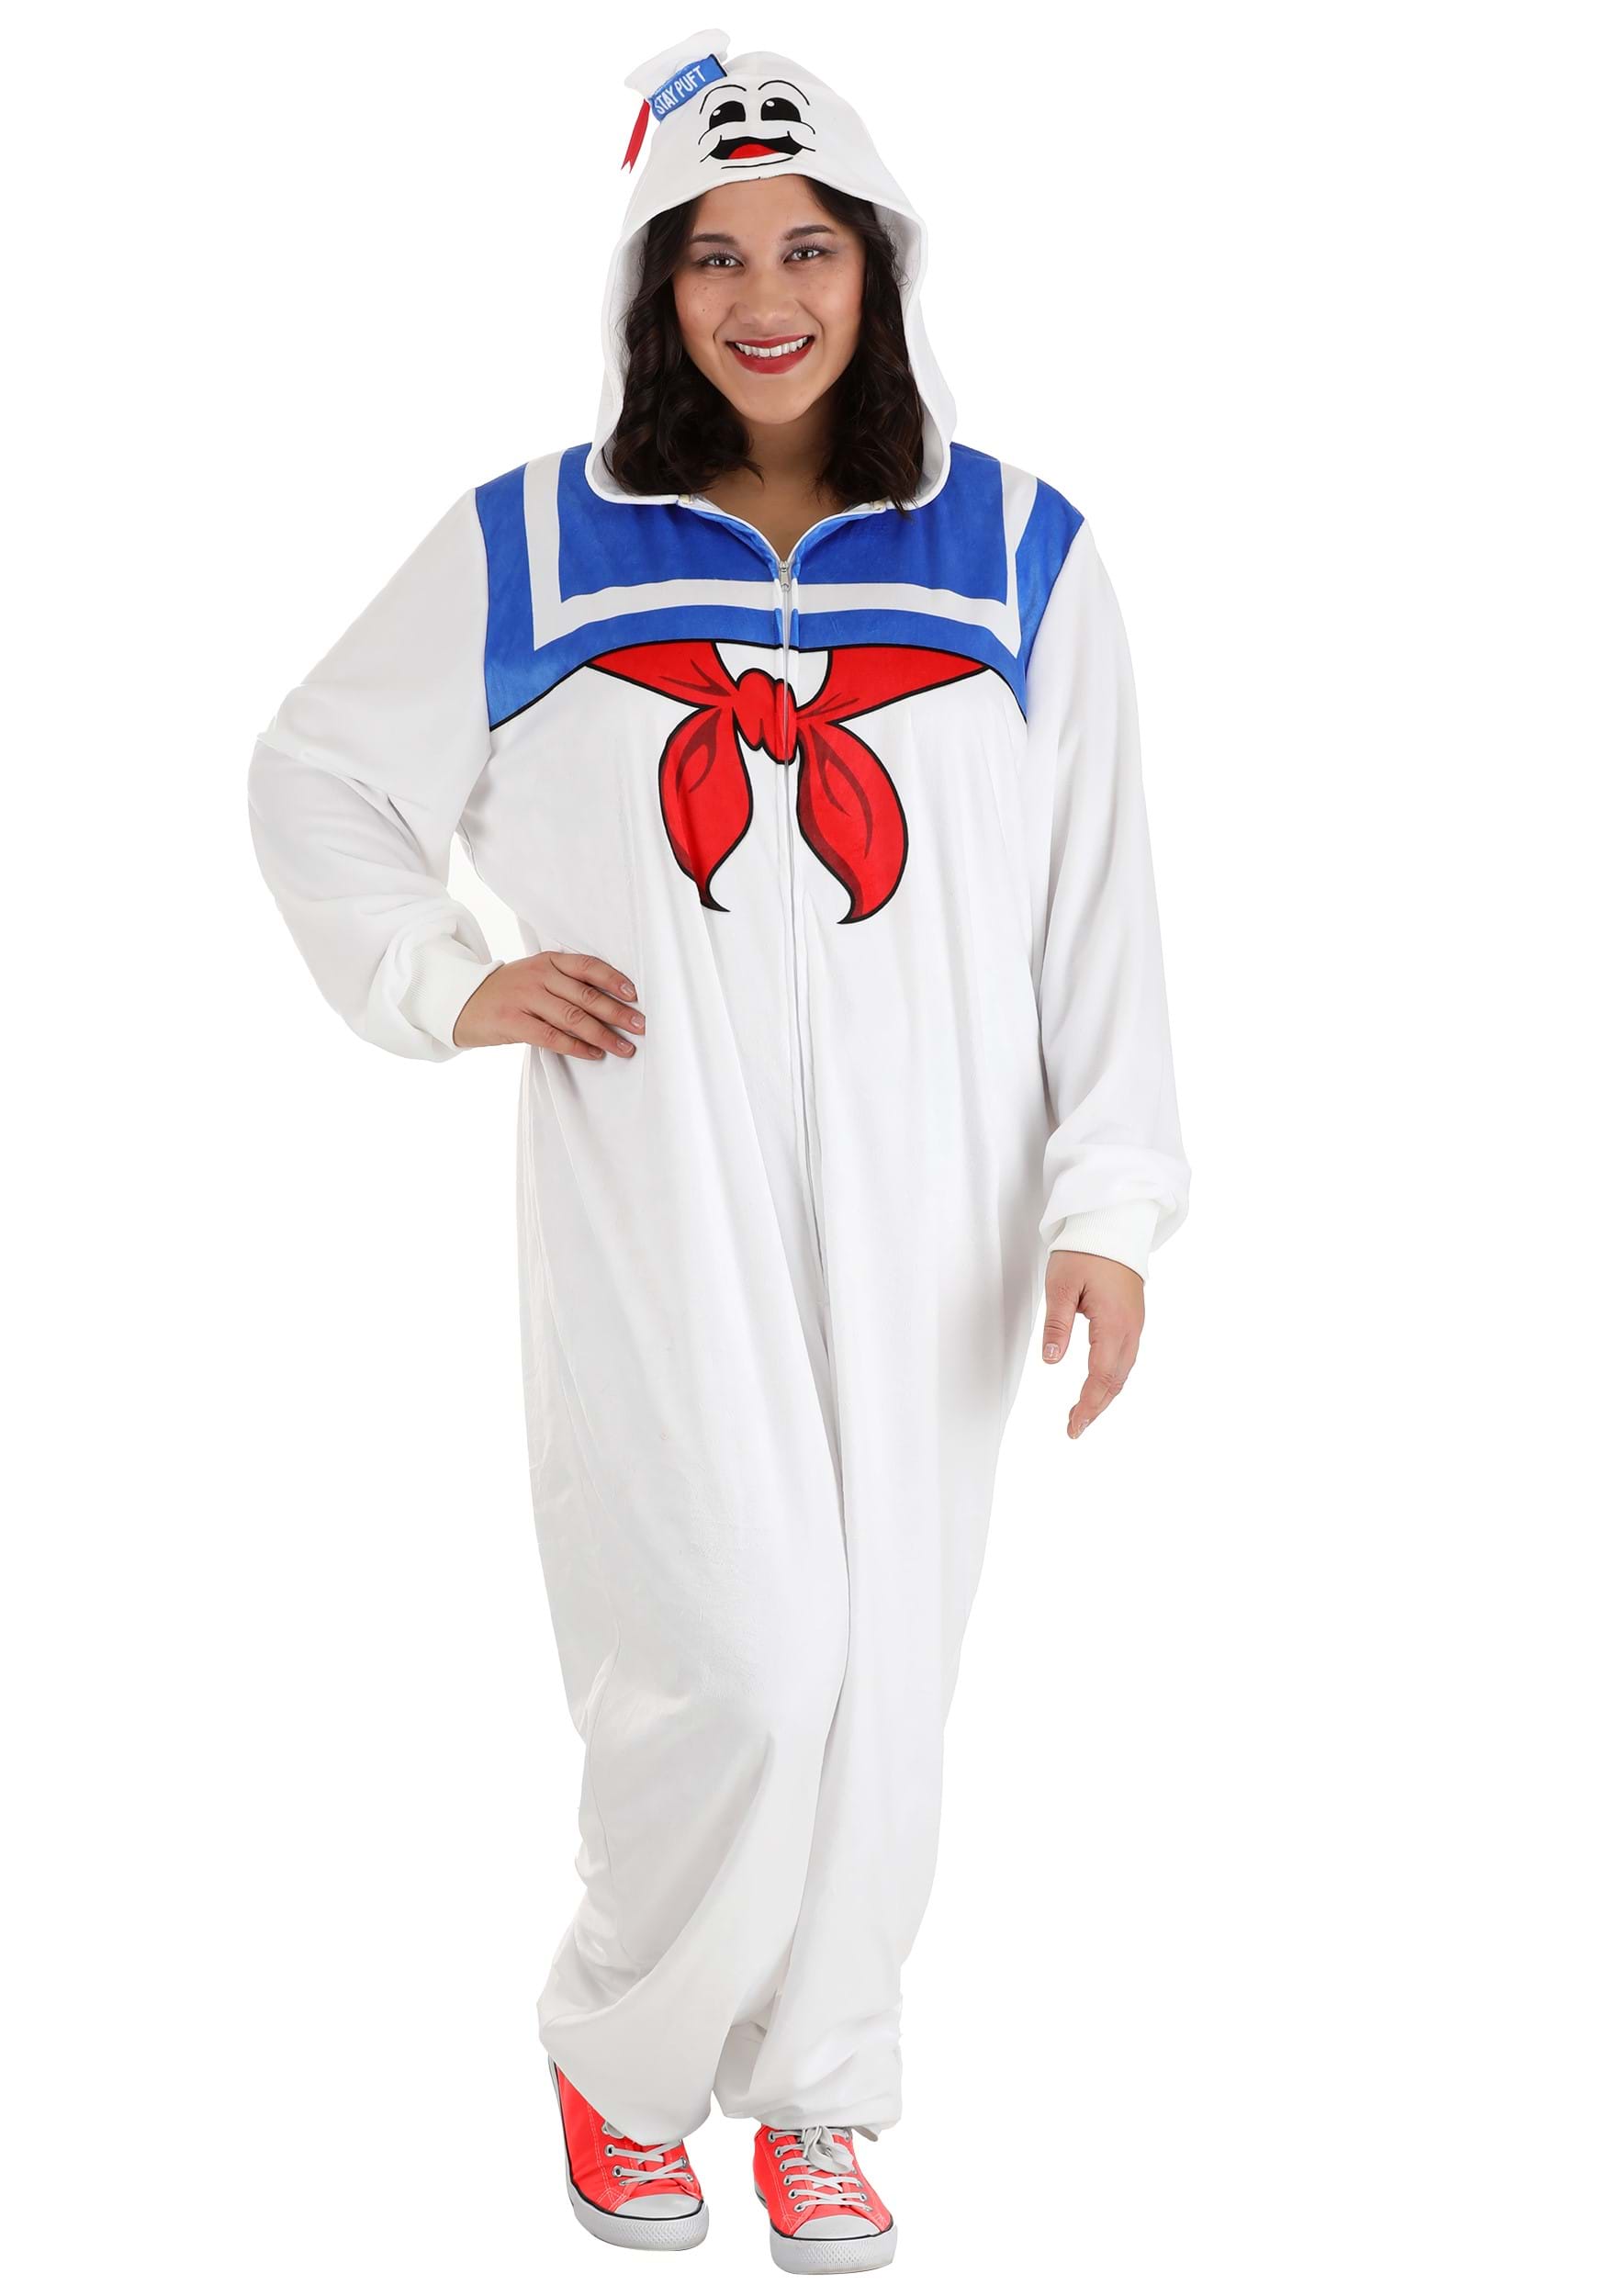 Photos - Fancy Dress Stay FUN Costumes  Puft Marshmallow Man Plus Size Costume Onesie for Adults 